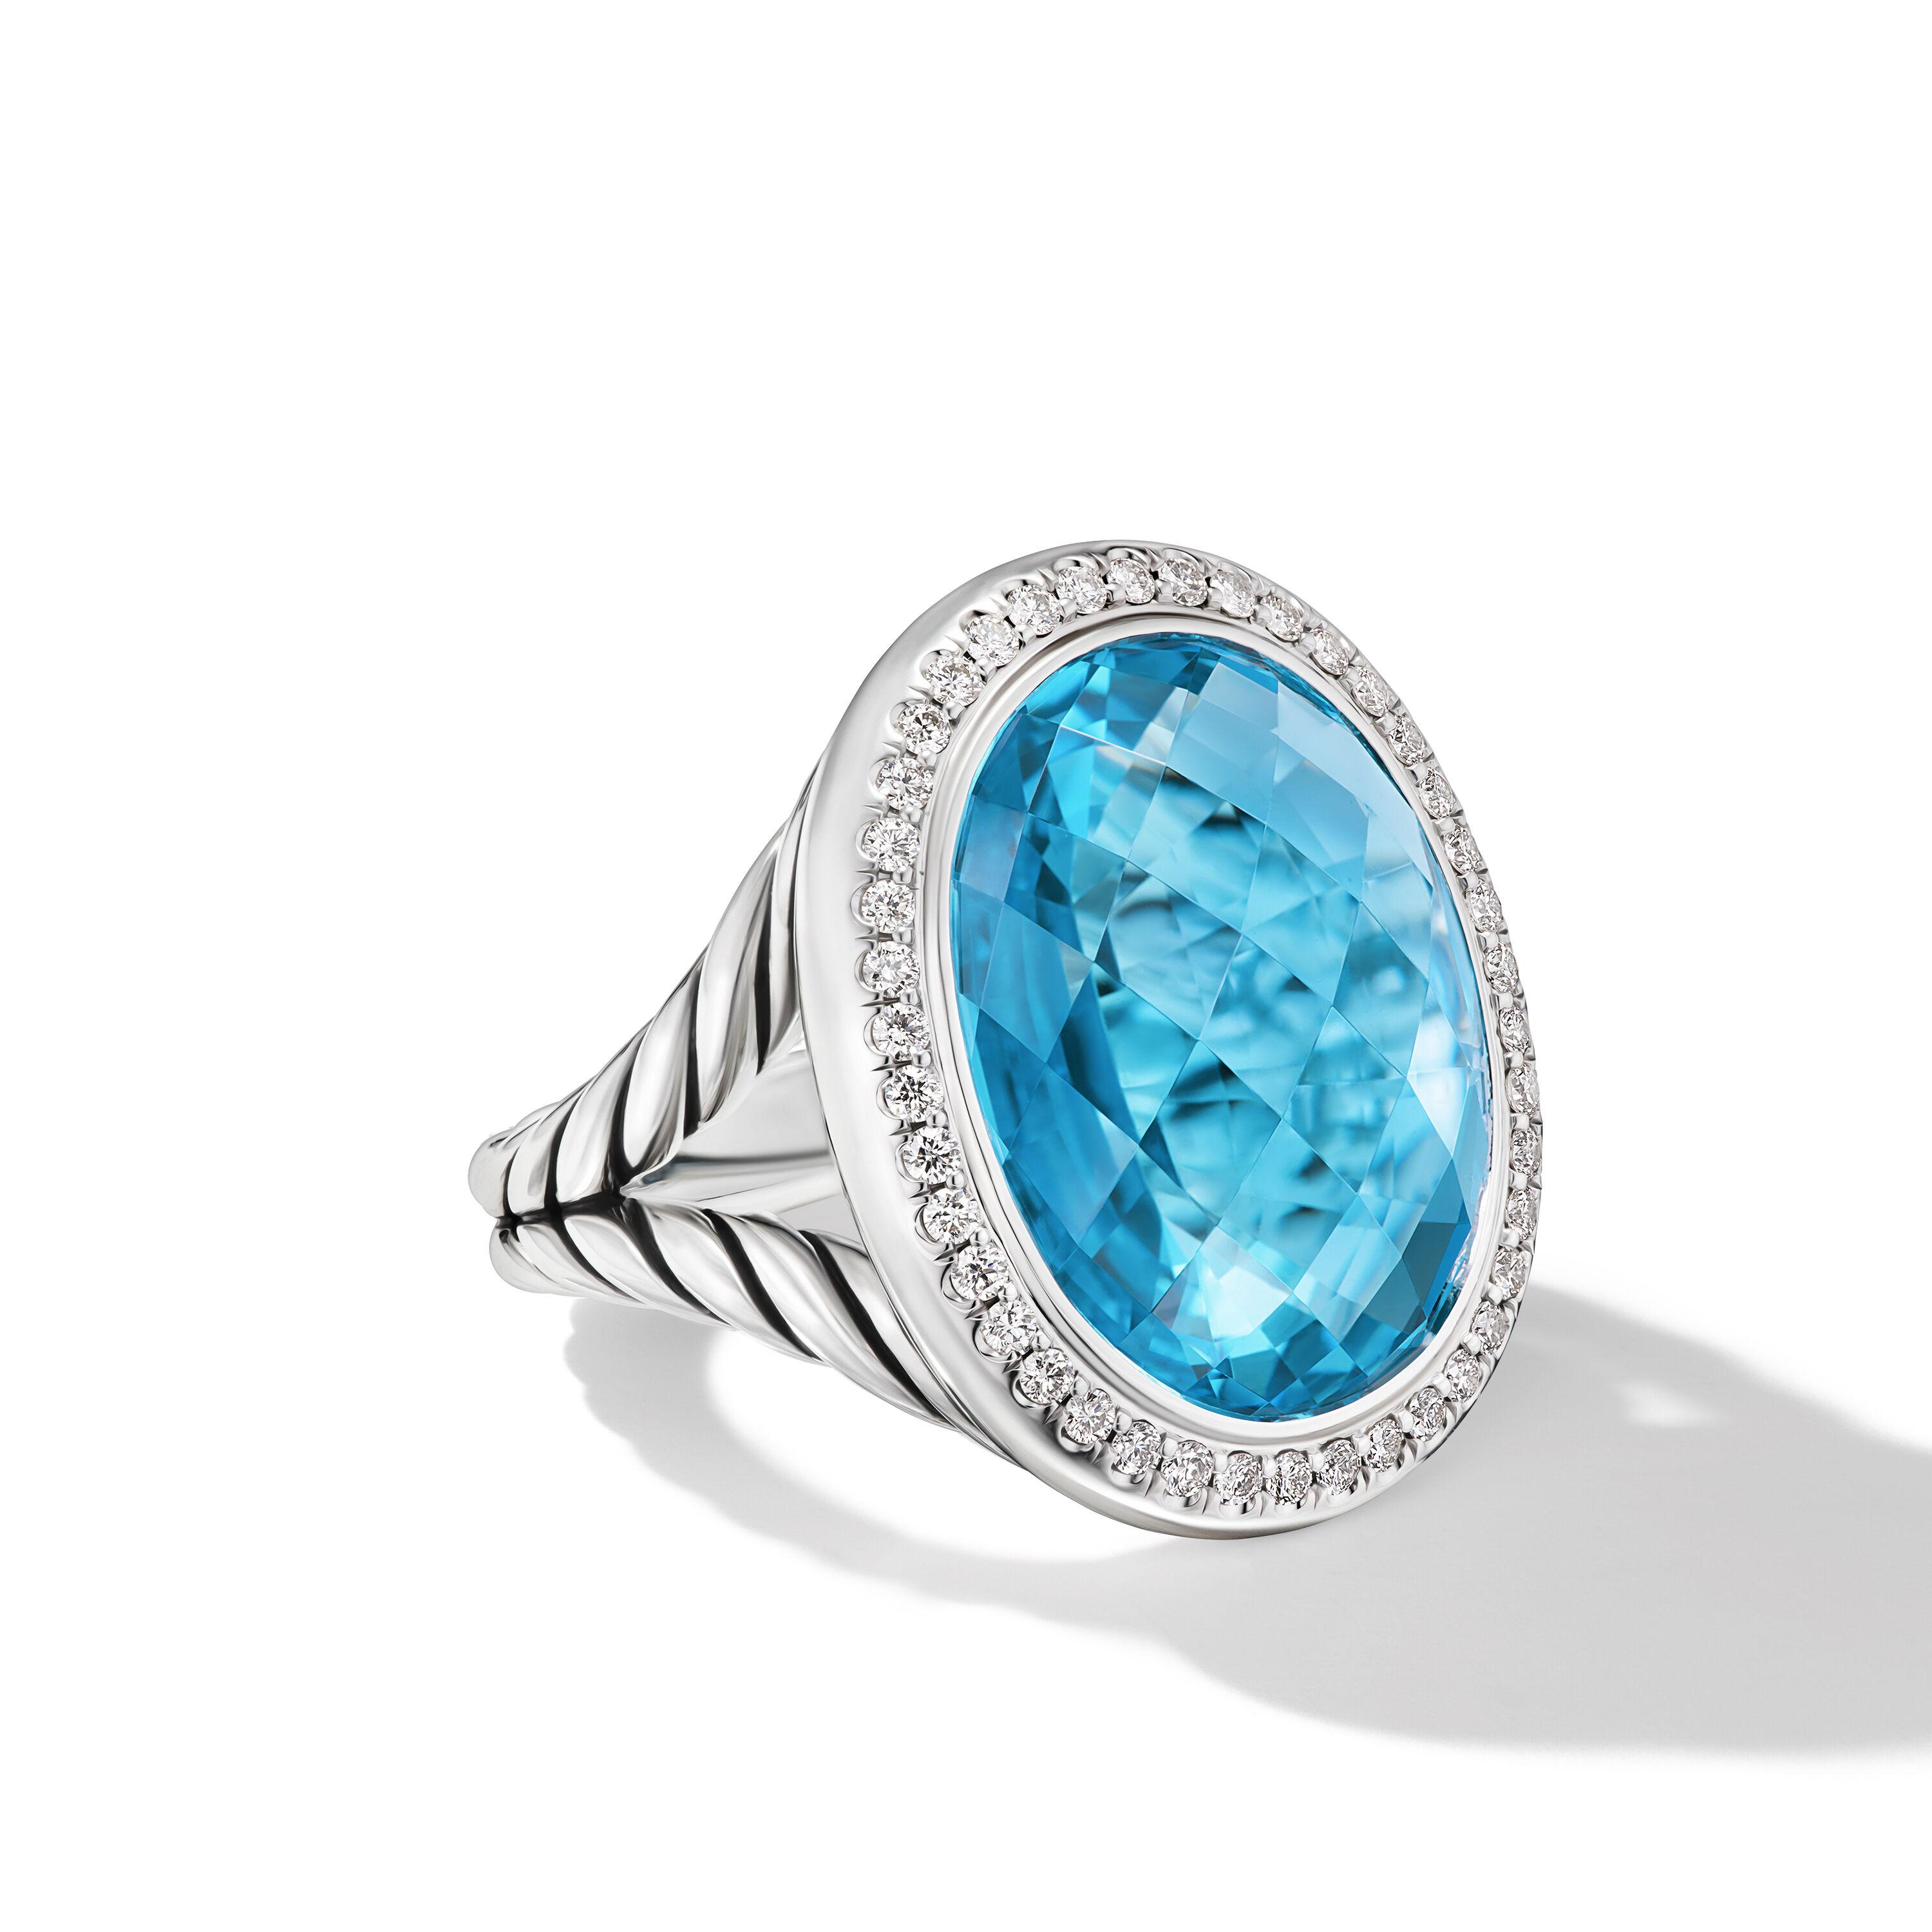 David Yurman Albion Oval Ring in Sterling Silver with Blue Topaz and Diamonds